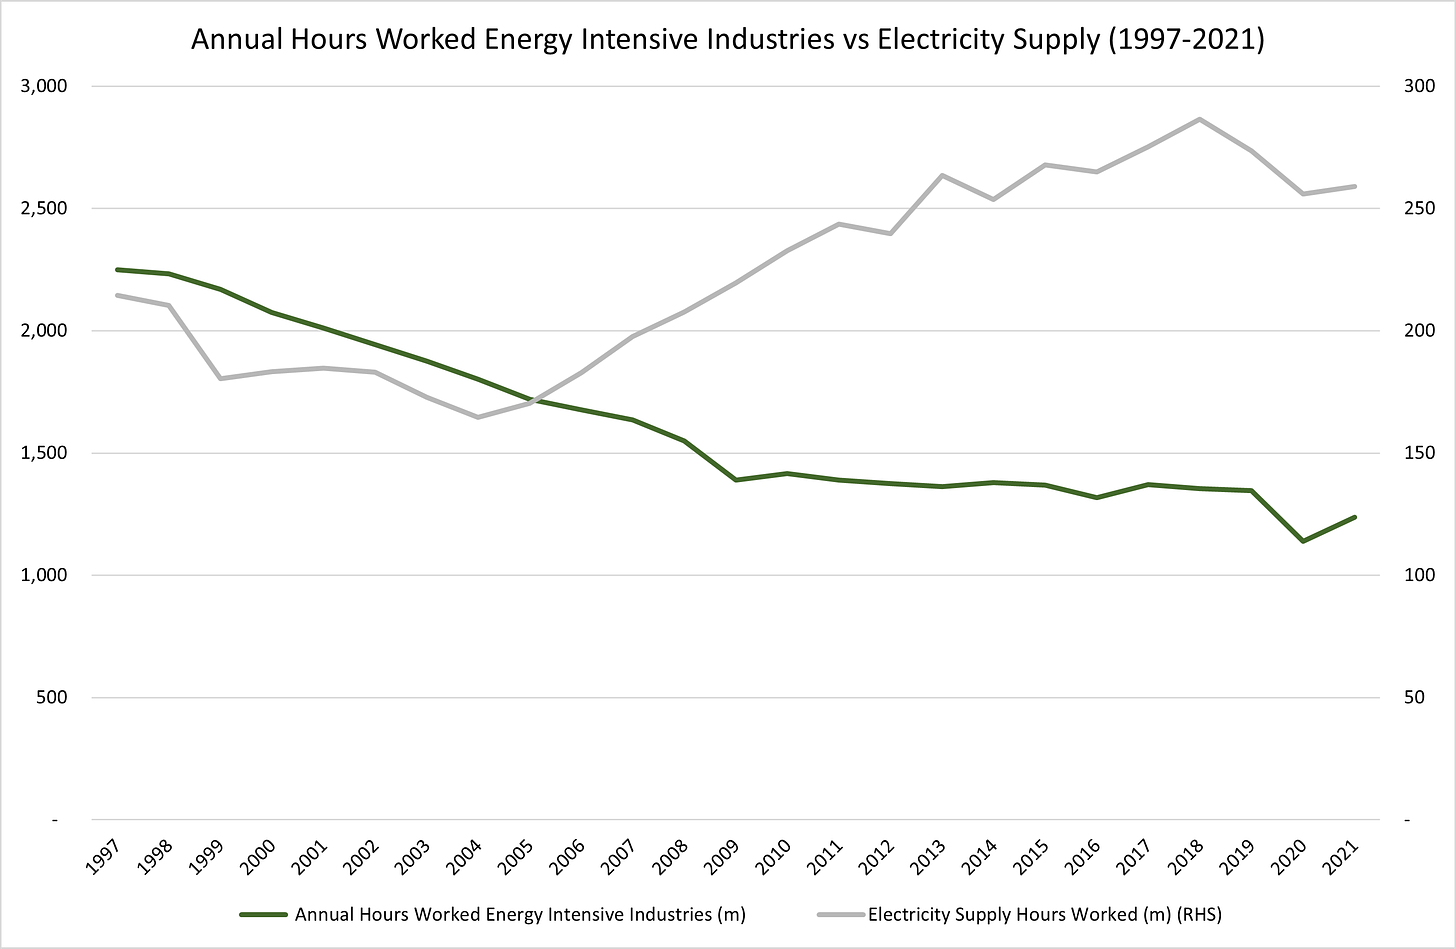 Figure 5 - Hours Worked in Energy Intensive Industries vs Electricity Supply (1997-2021)